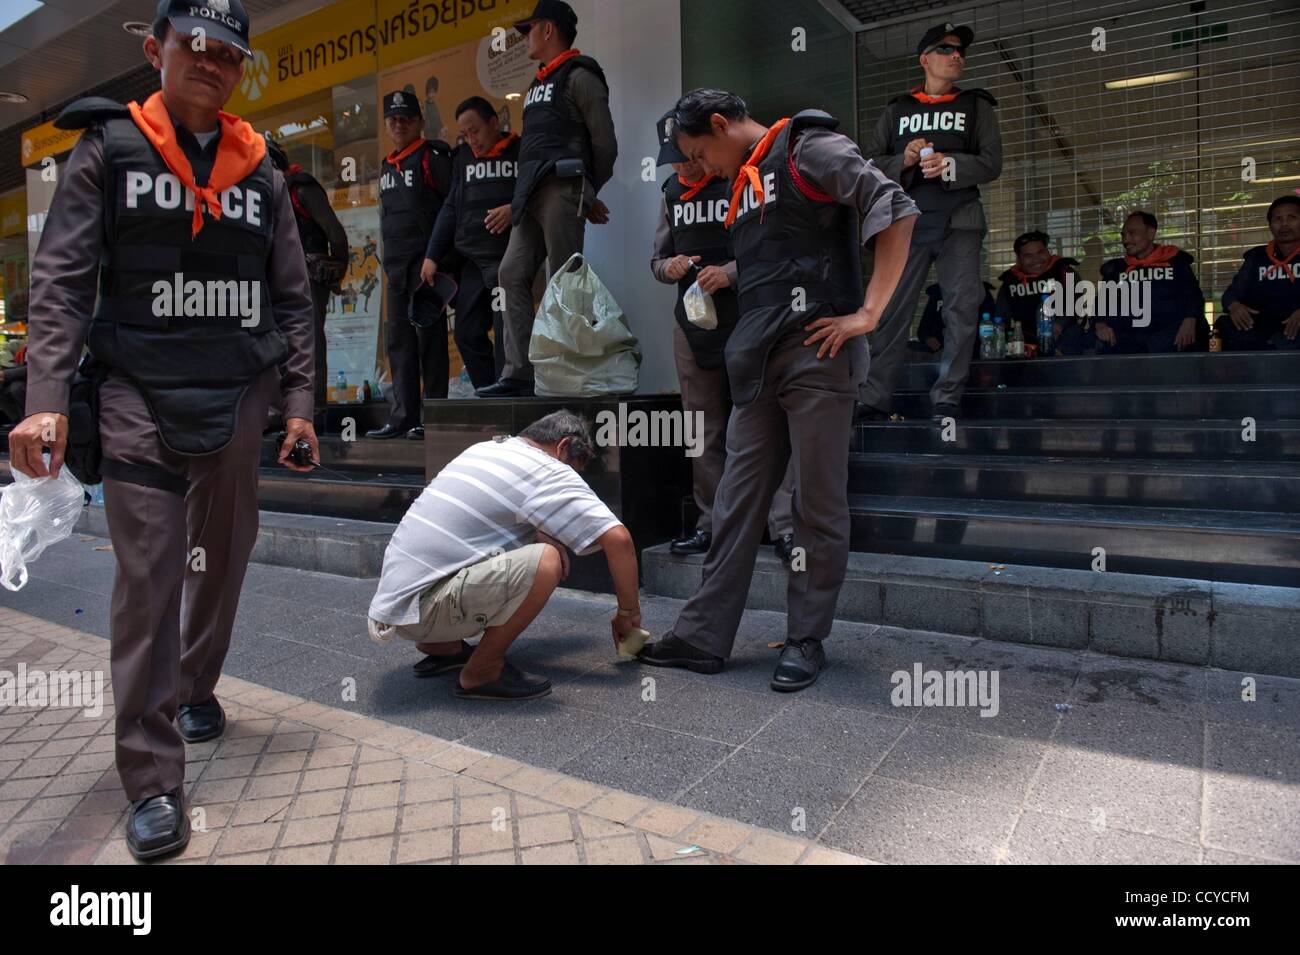 Apr 19, 2010 - Bangkok, Thailand - A Thai riot police officer is having his boots shined by the shoe shiner in the heart of Bangkok's financial district. Thai Army and Thai Royal Police have been deployed to the financial district to safe guard it as the anti-government Red Shirt protesters announce Stock Photo